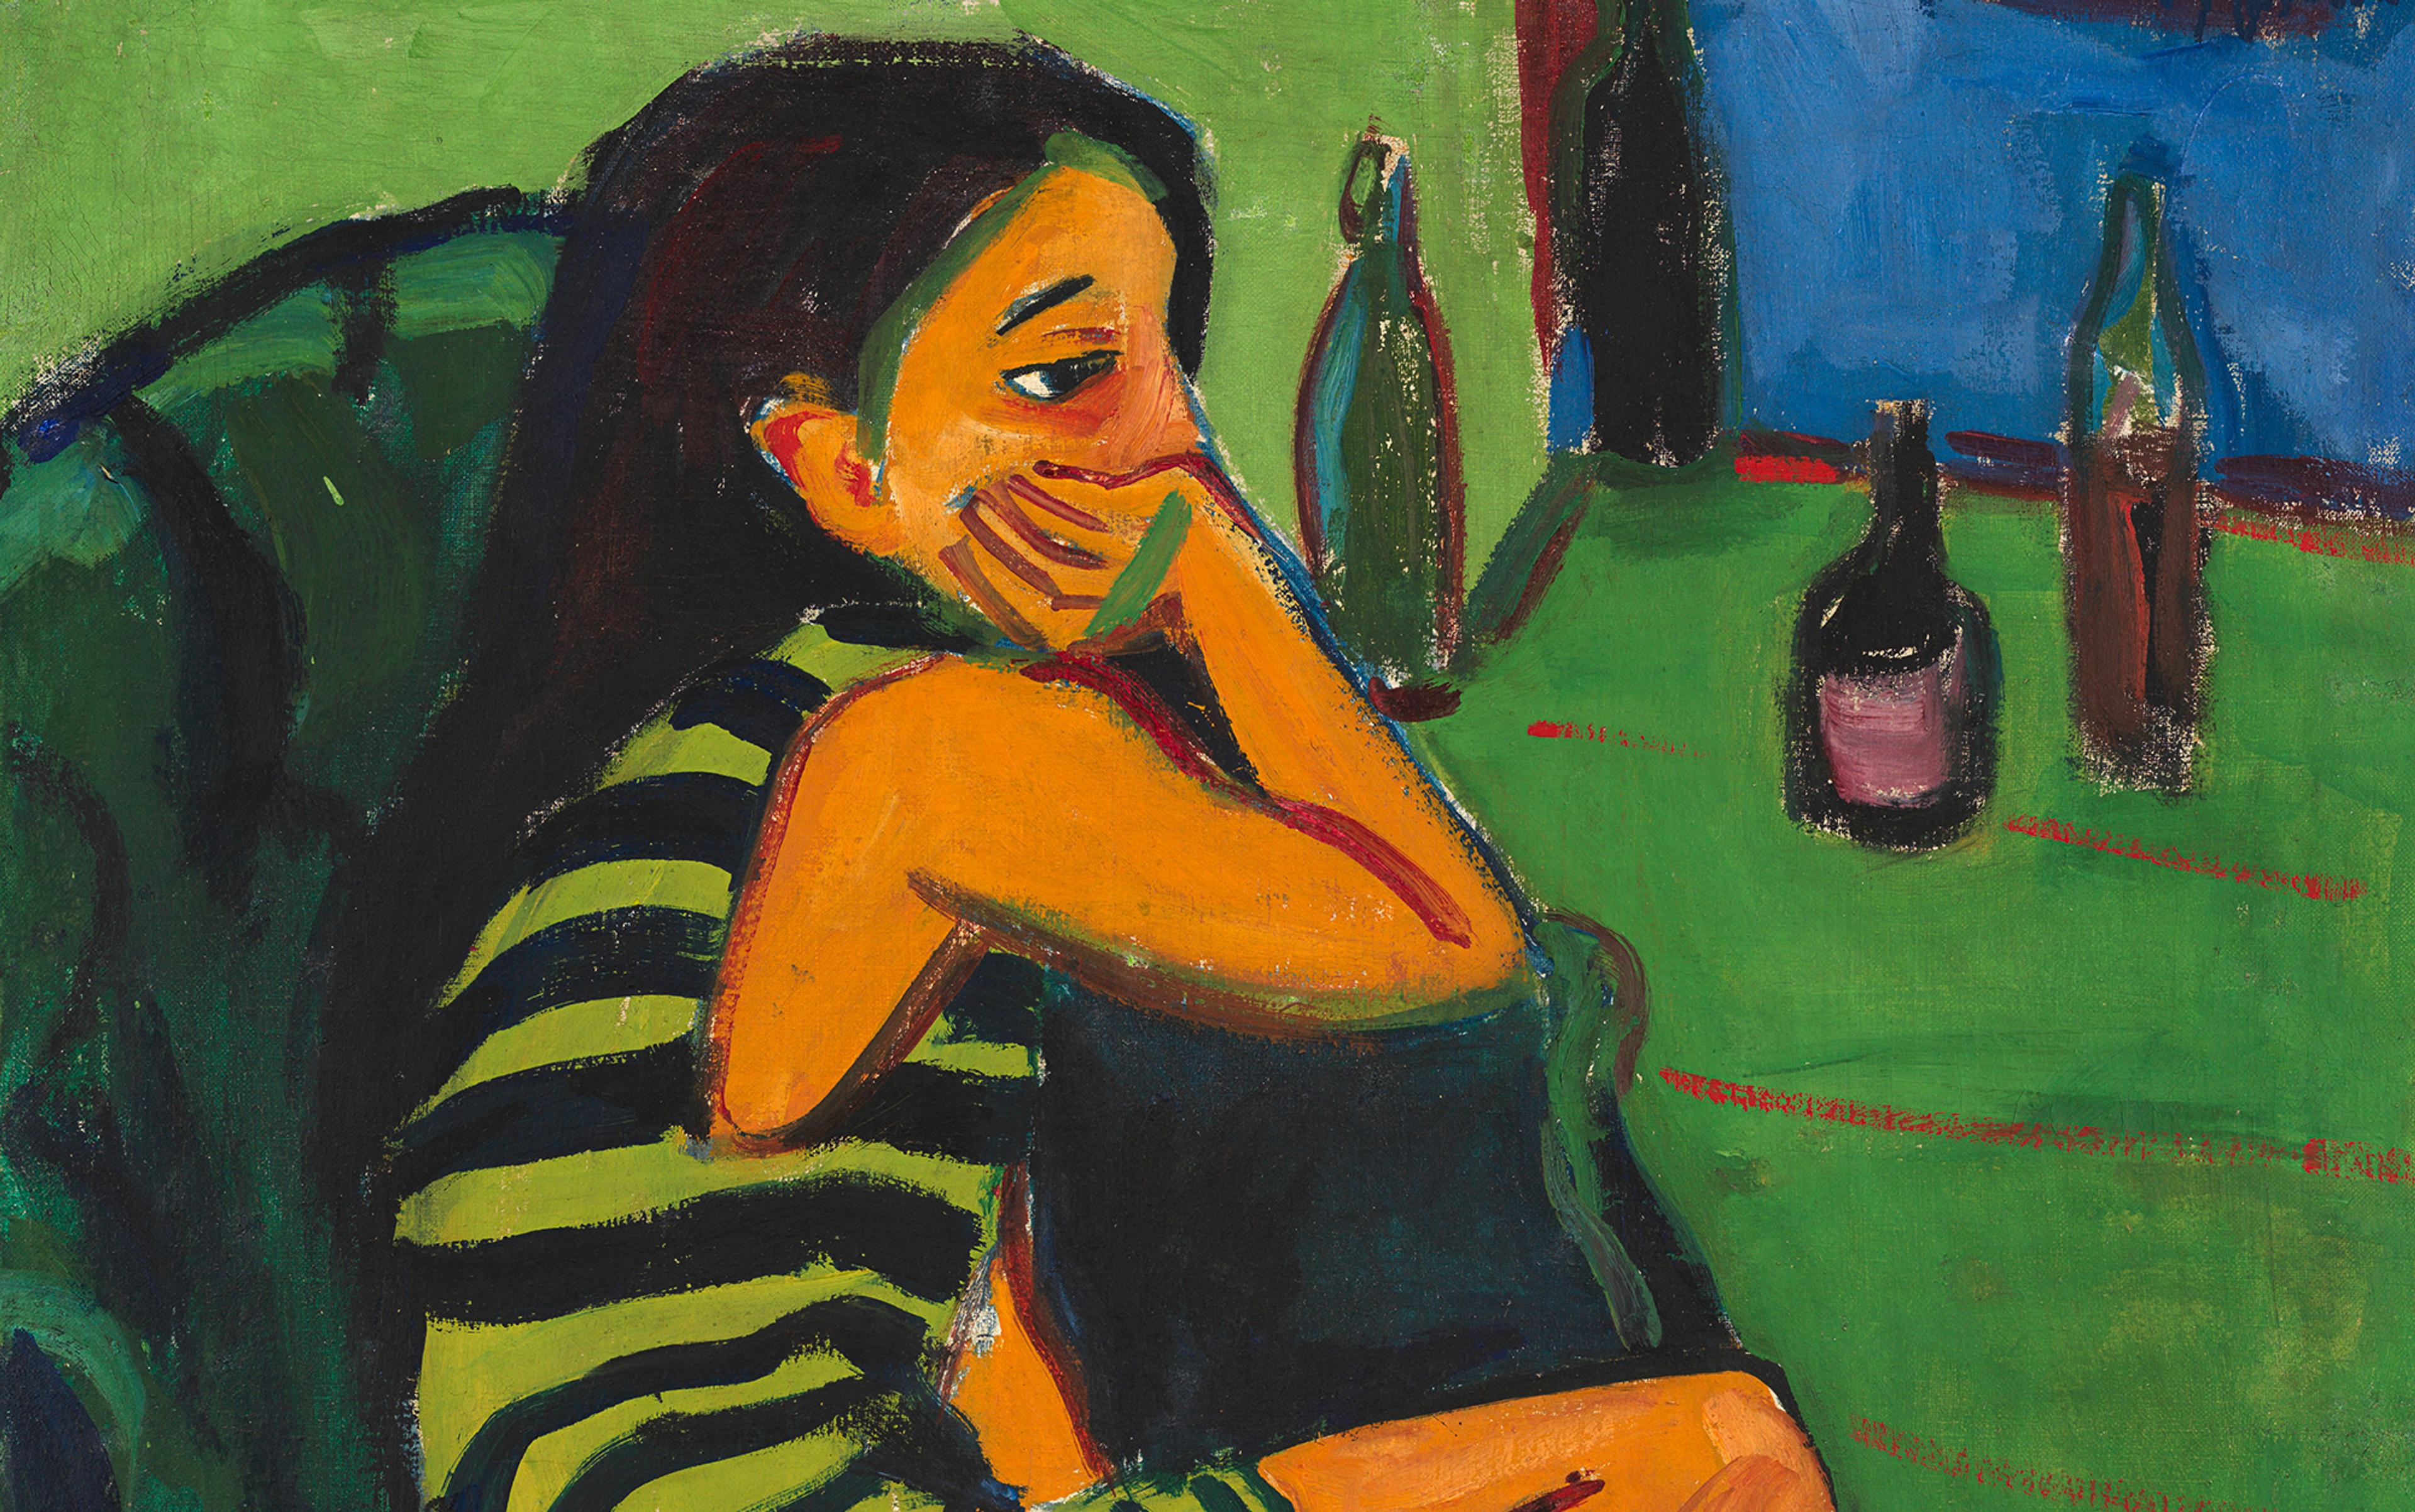 Painting of a person in a striped dress, resting their head on their hand, sitting next to a table with bottles, and a green background.